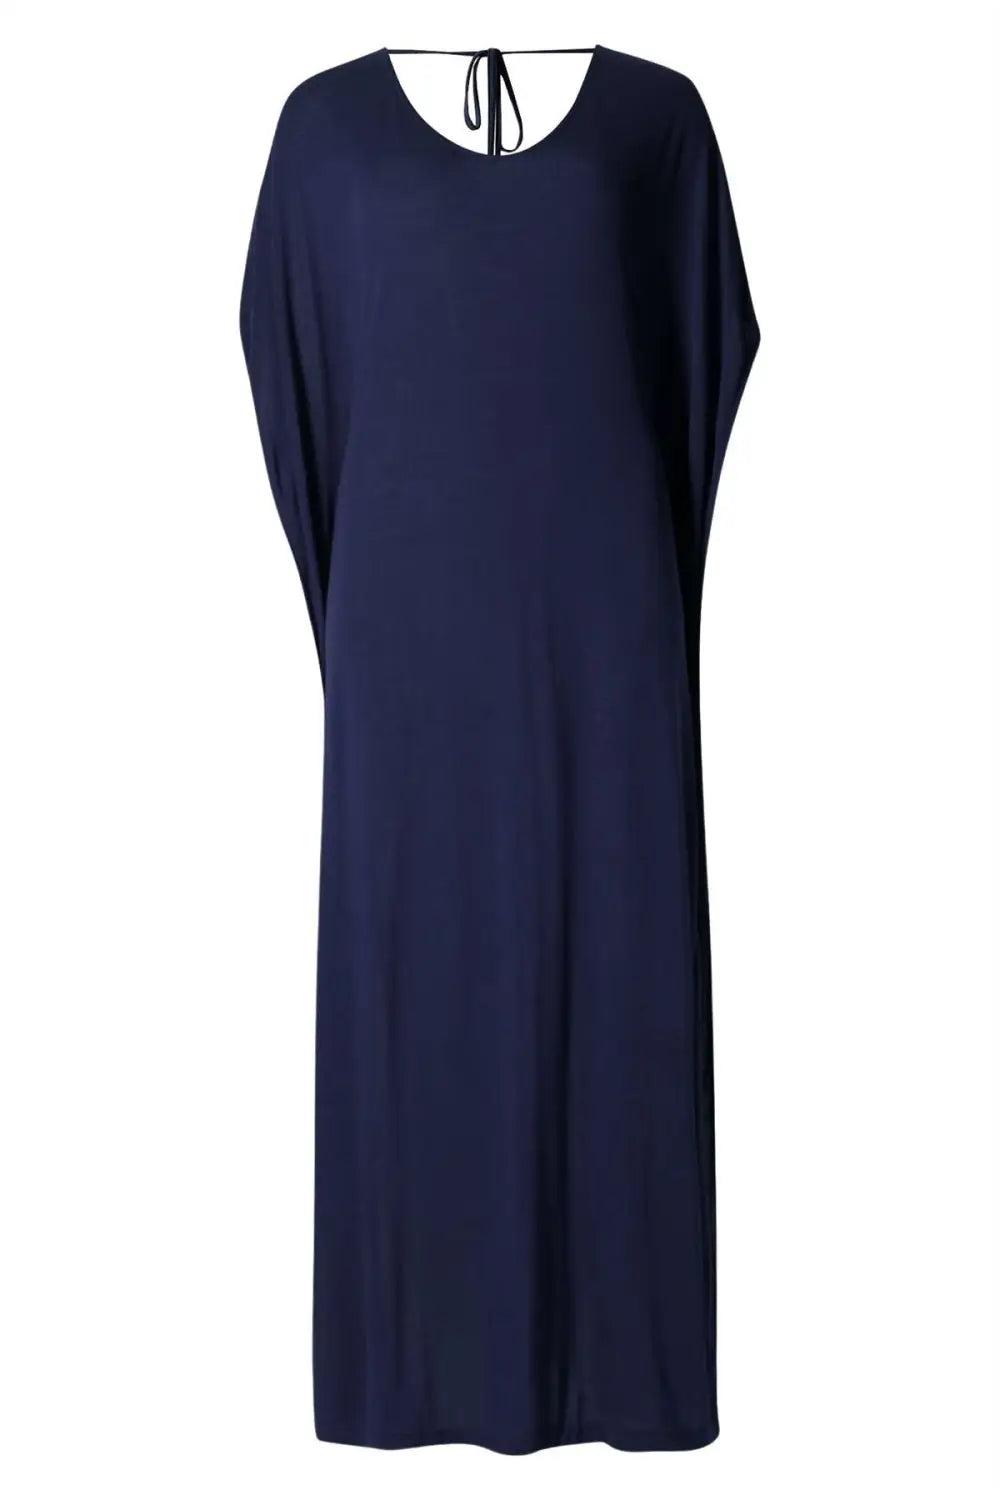 M&S Relaxed Angel Sleeve Maxi Dress